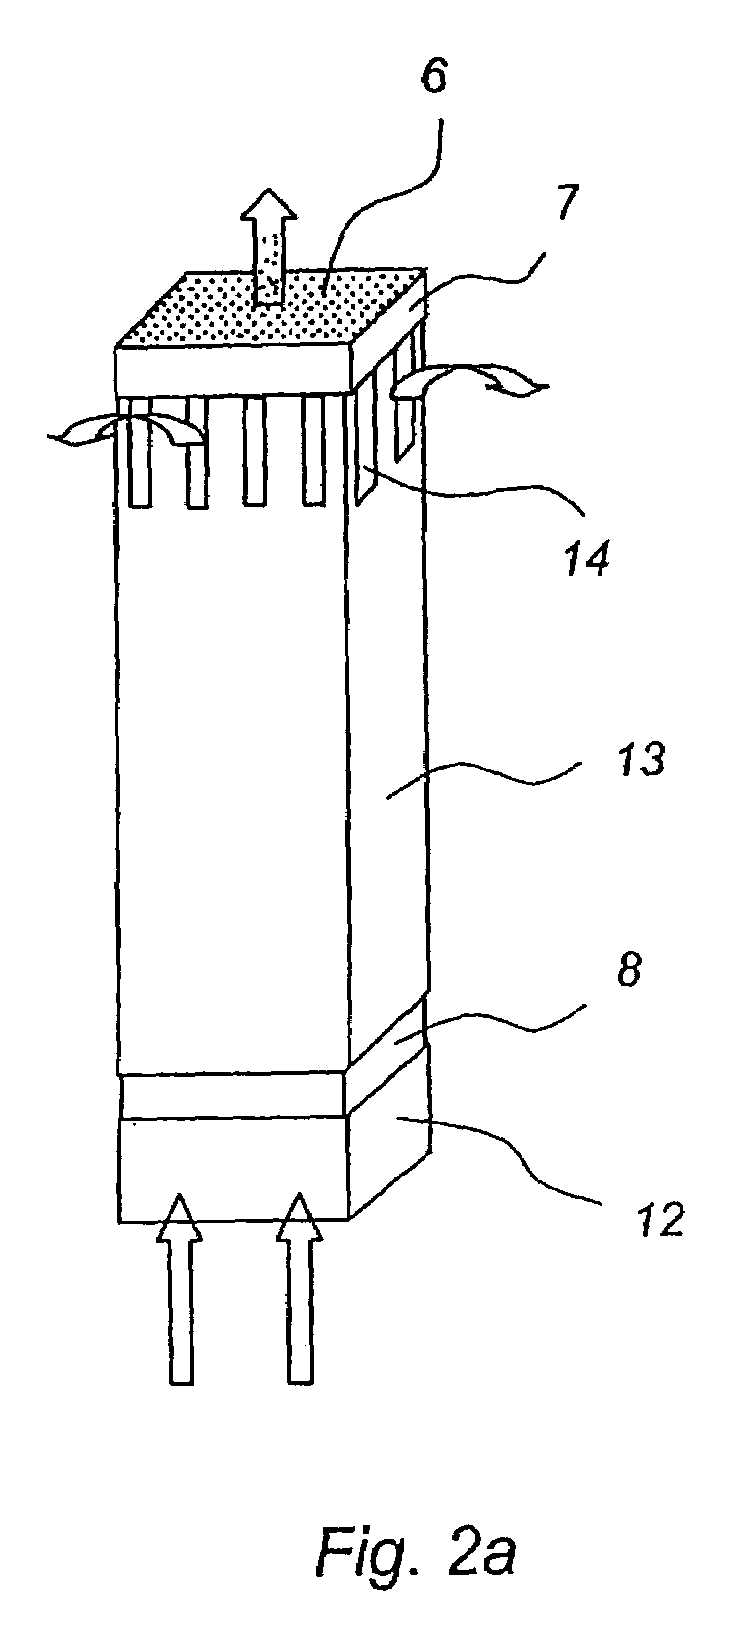 Submerged cross-flow filtration